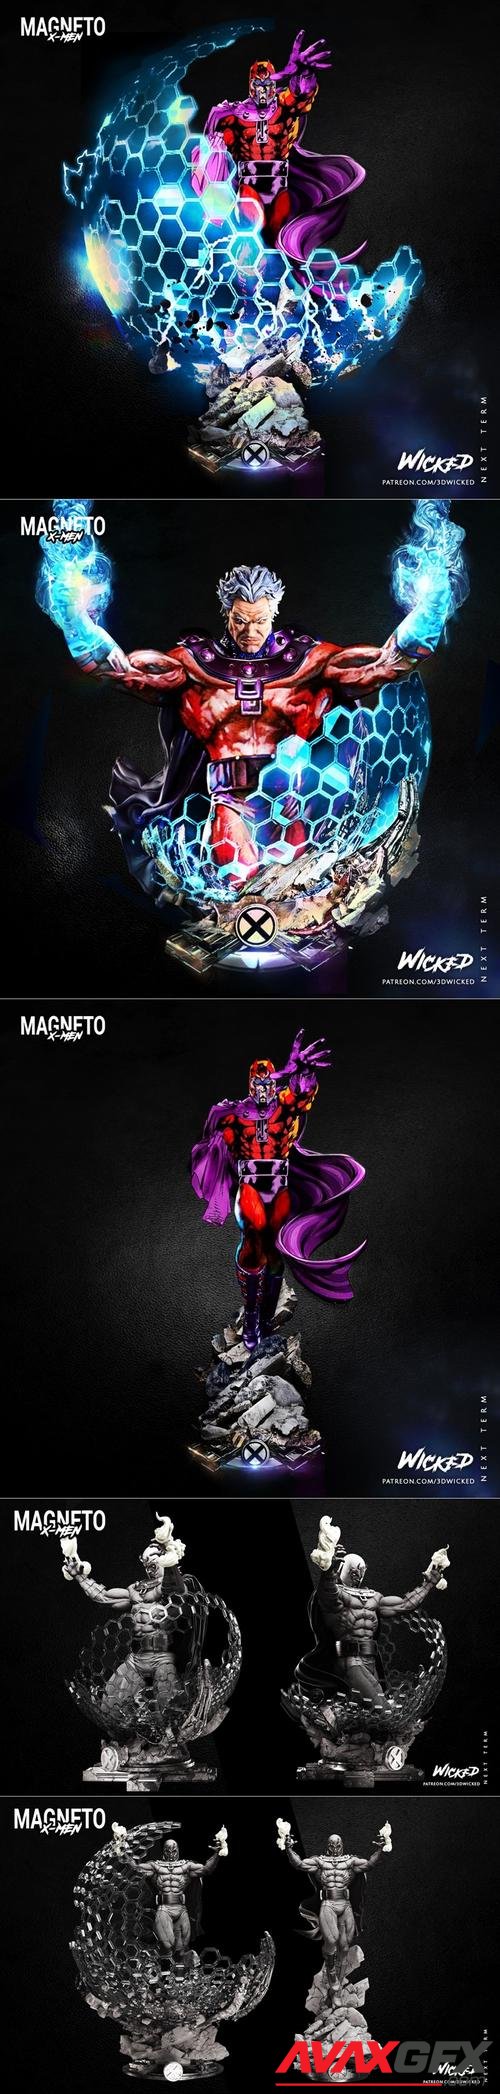 Wicked - Magneto - Statue and Bust – 3D Print